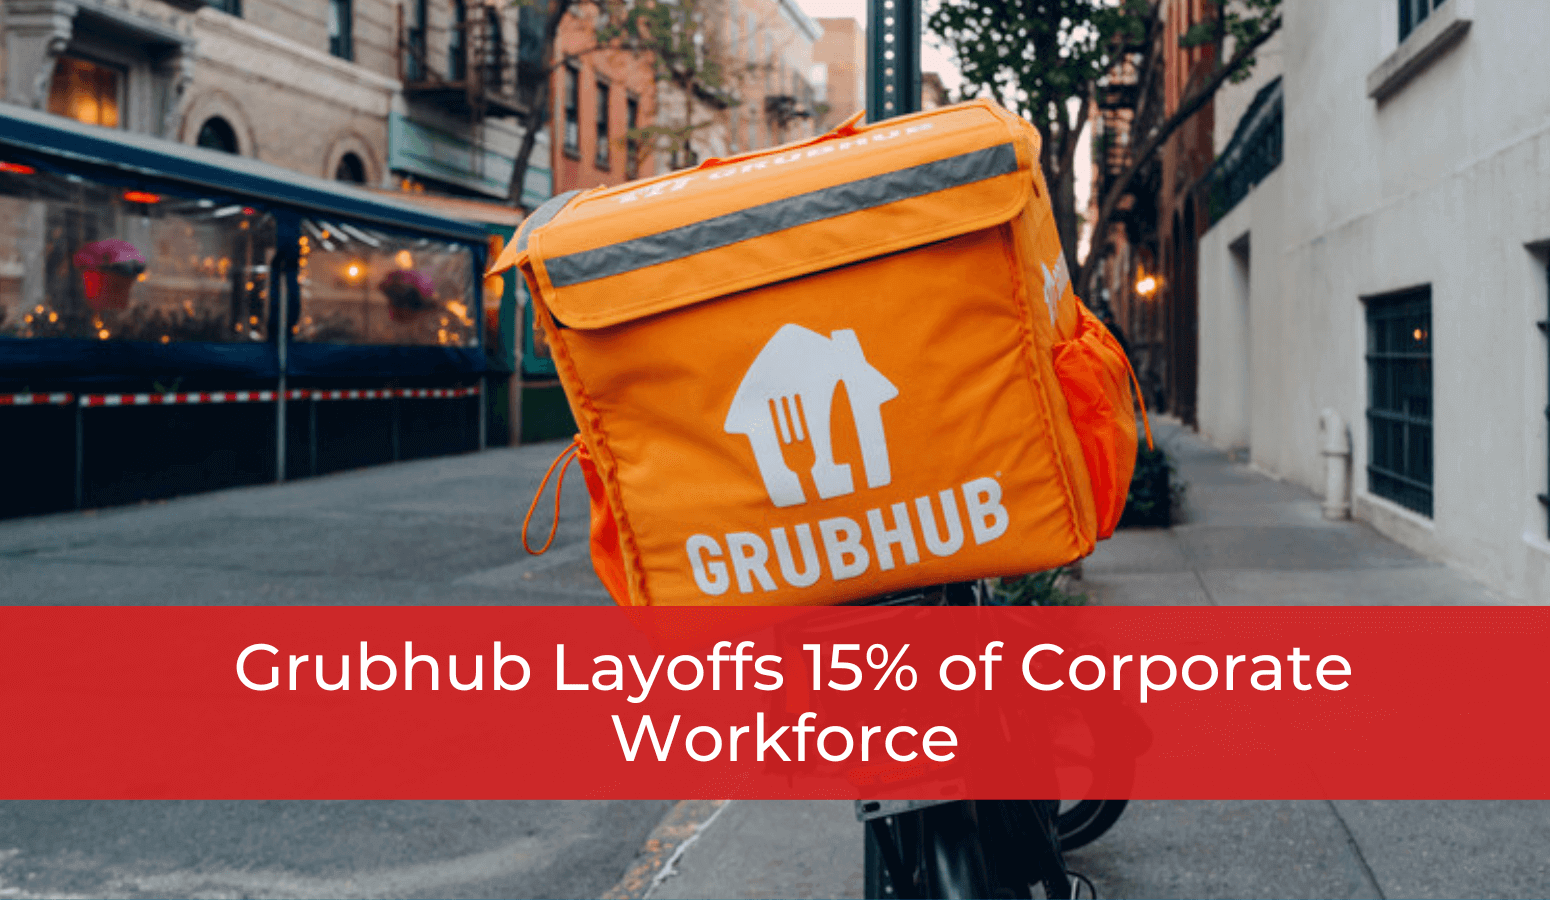 Featured image for “Grubhub Layoffs 15% of Corporate Workforce”